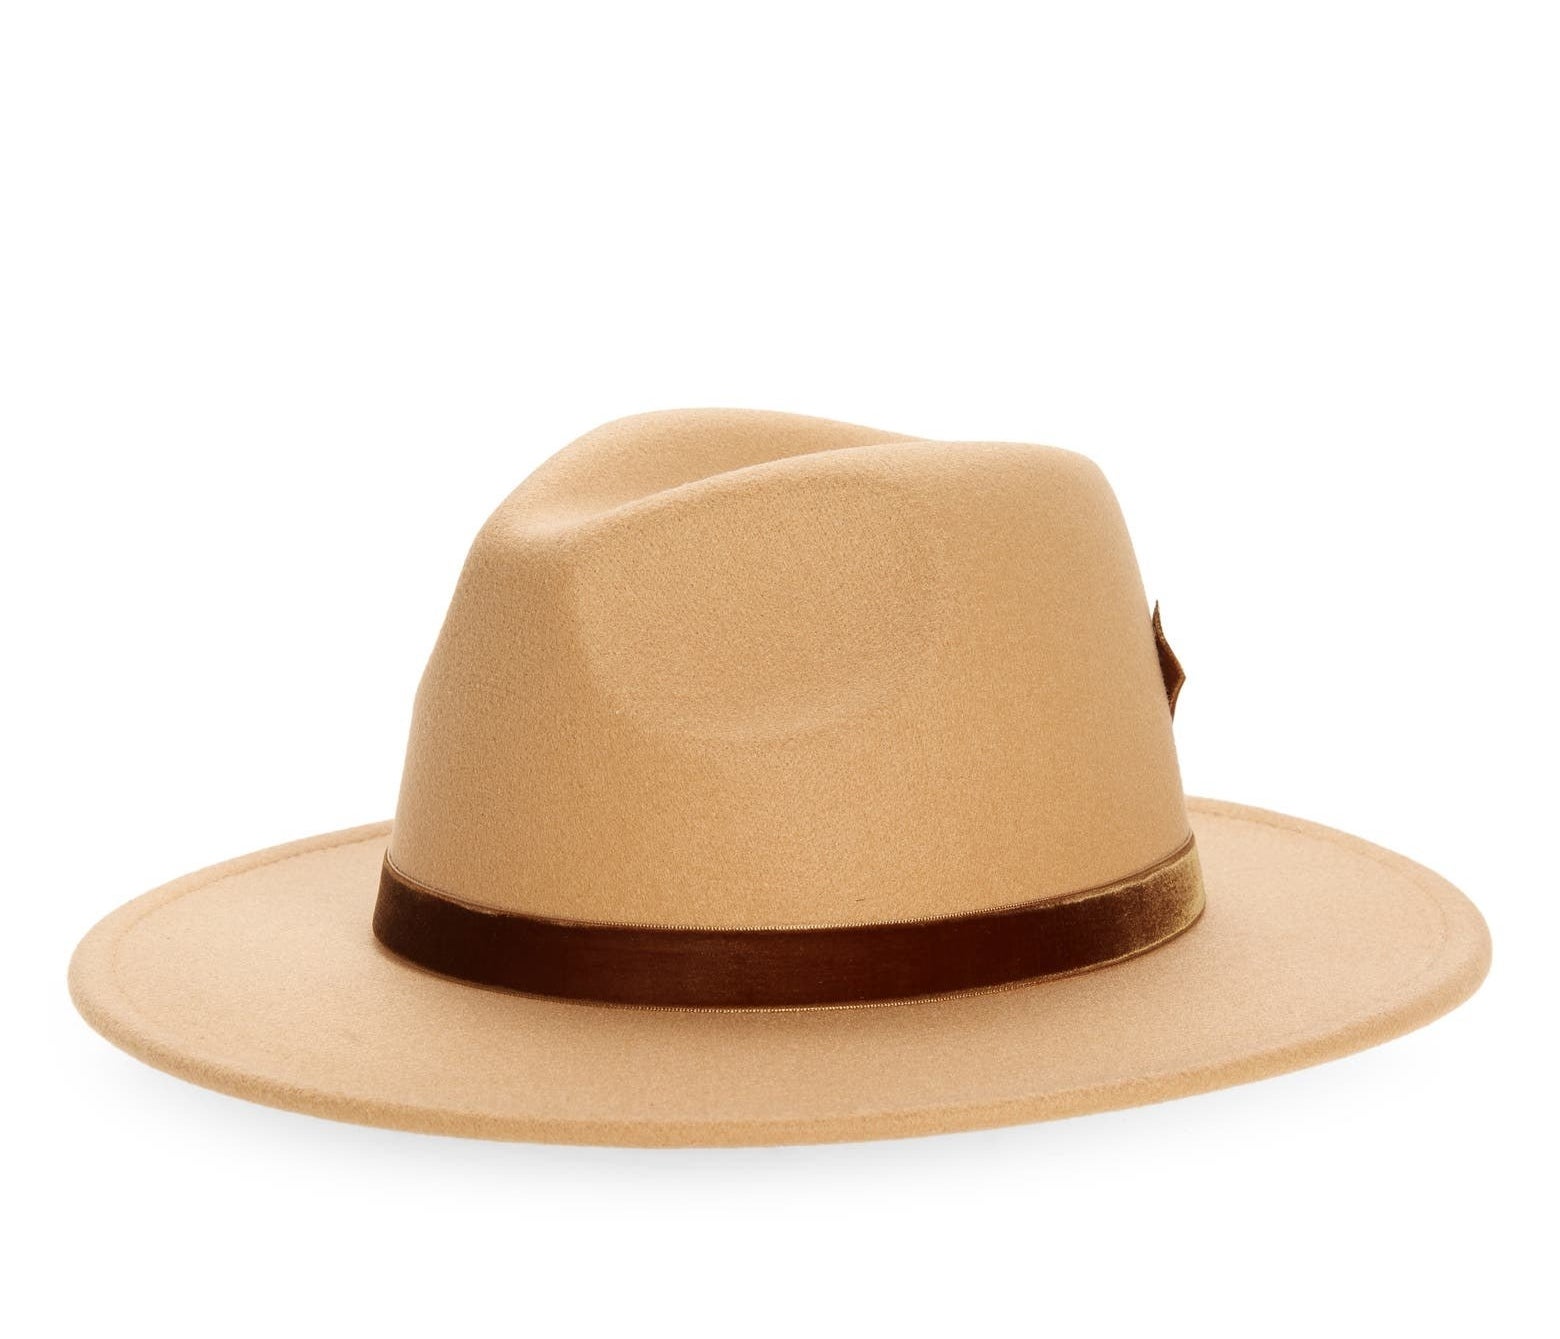 the tan hat with a dark brown middle band